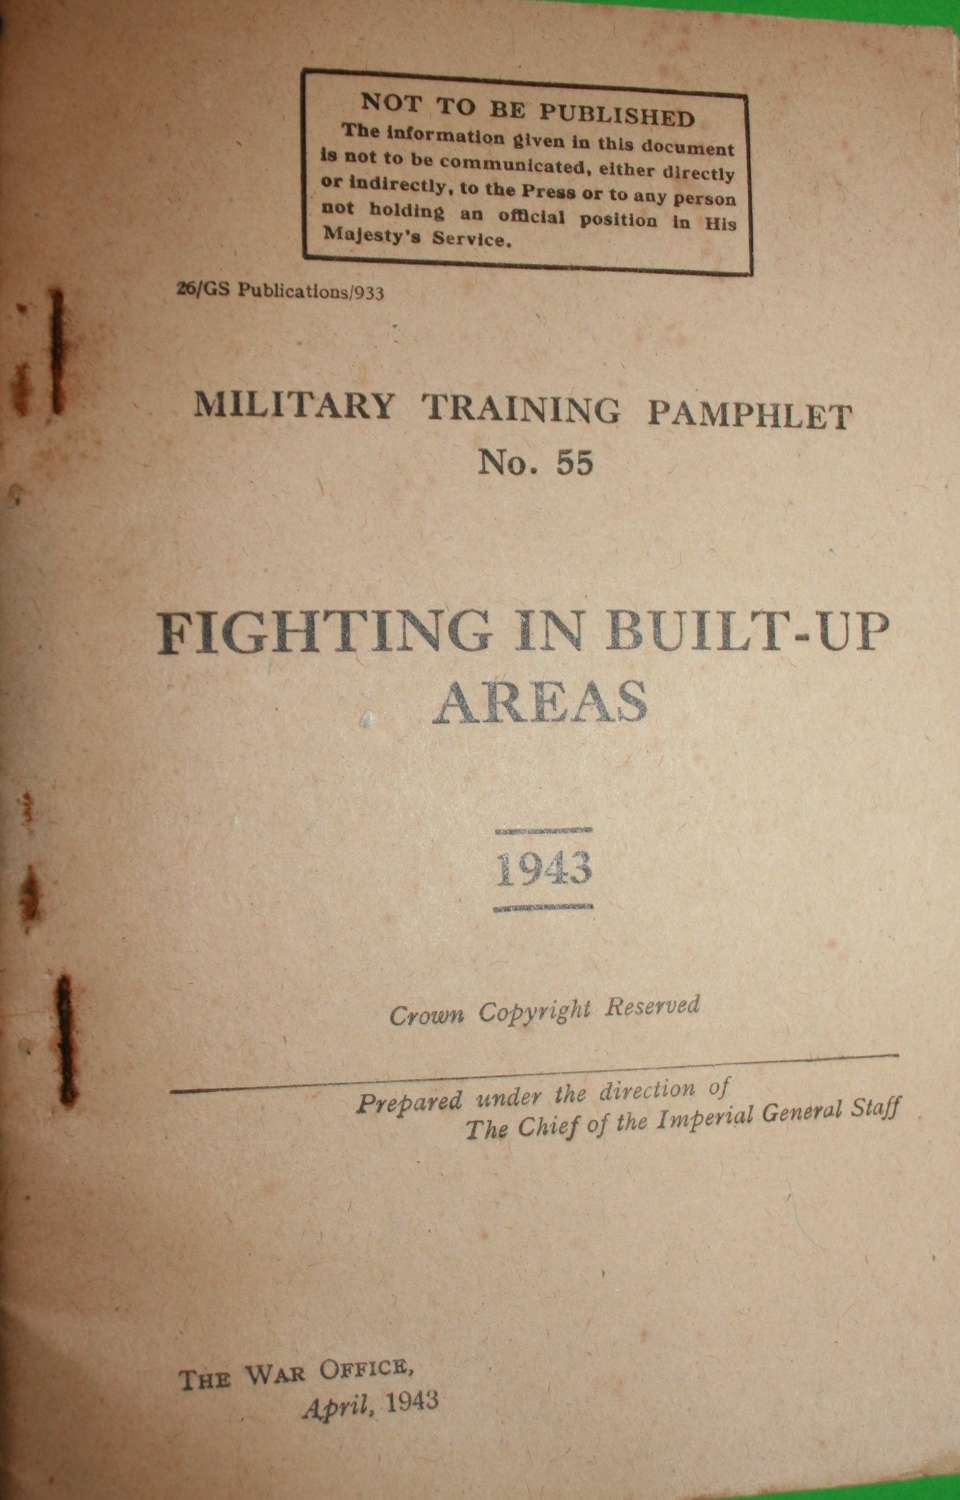 MILITARY TRAINING PAMPHLET NO 55 FIGHTING IN BUILT UP AREAS 1943